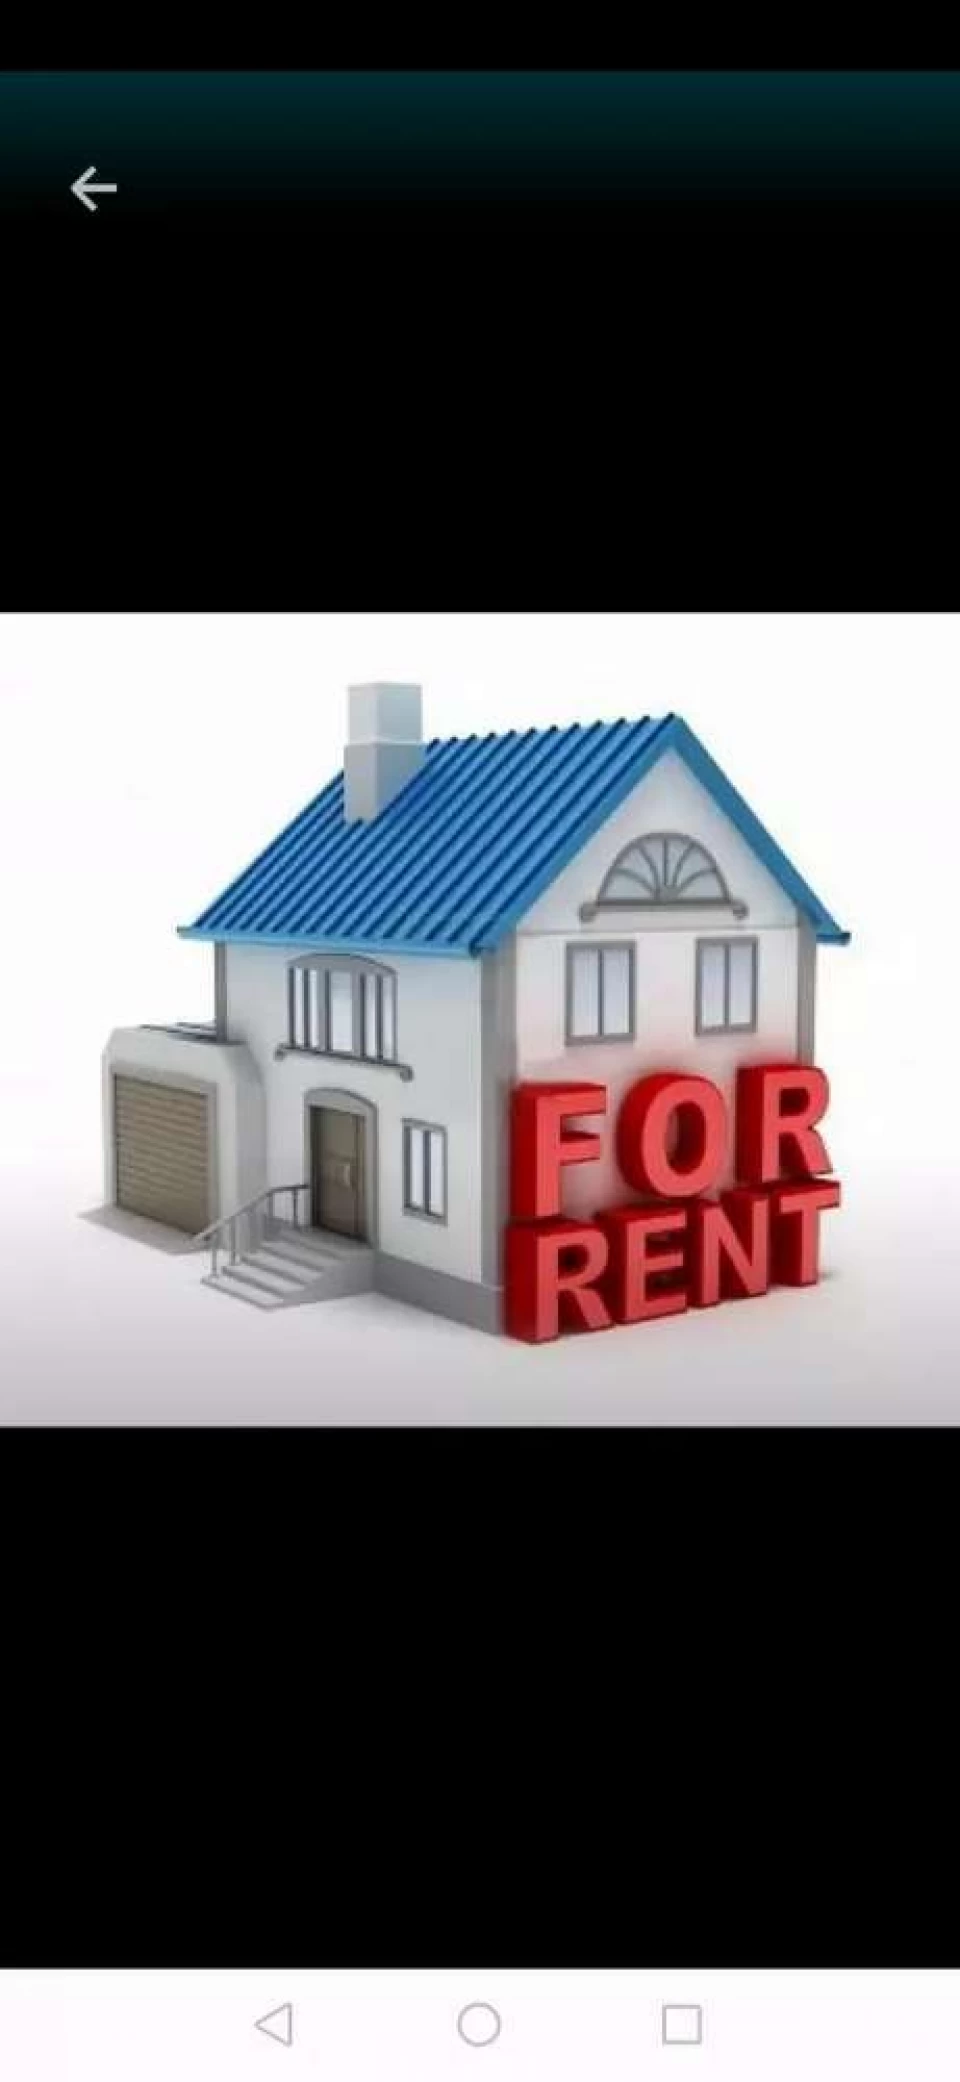 Houses available for rent in gulgusht, shalimar and zakryia